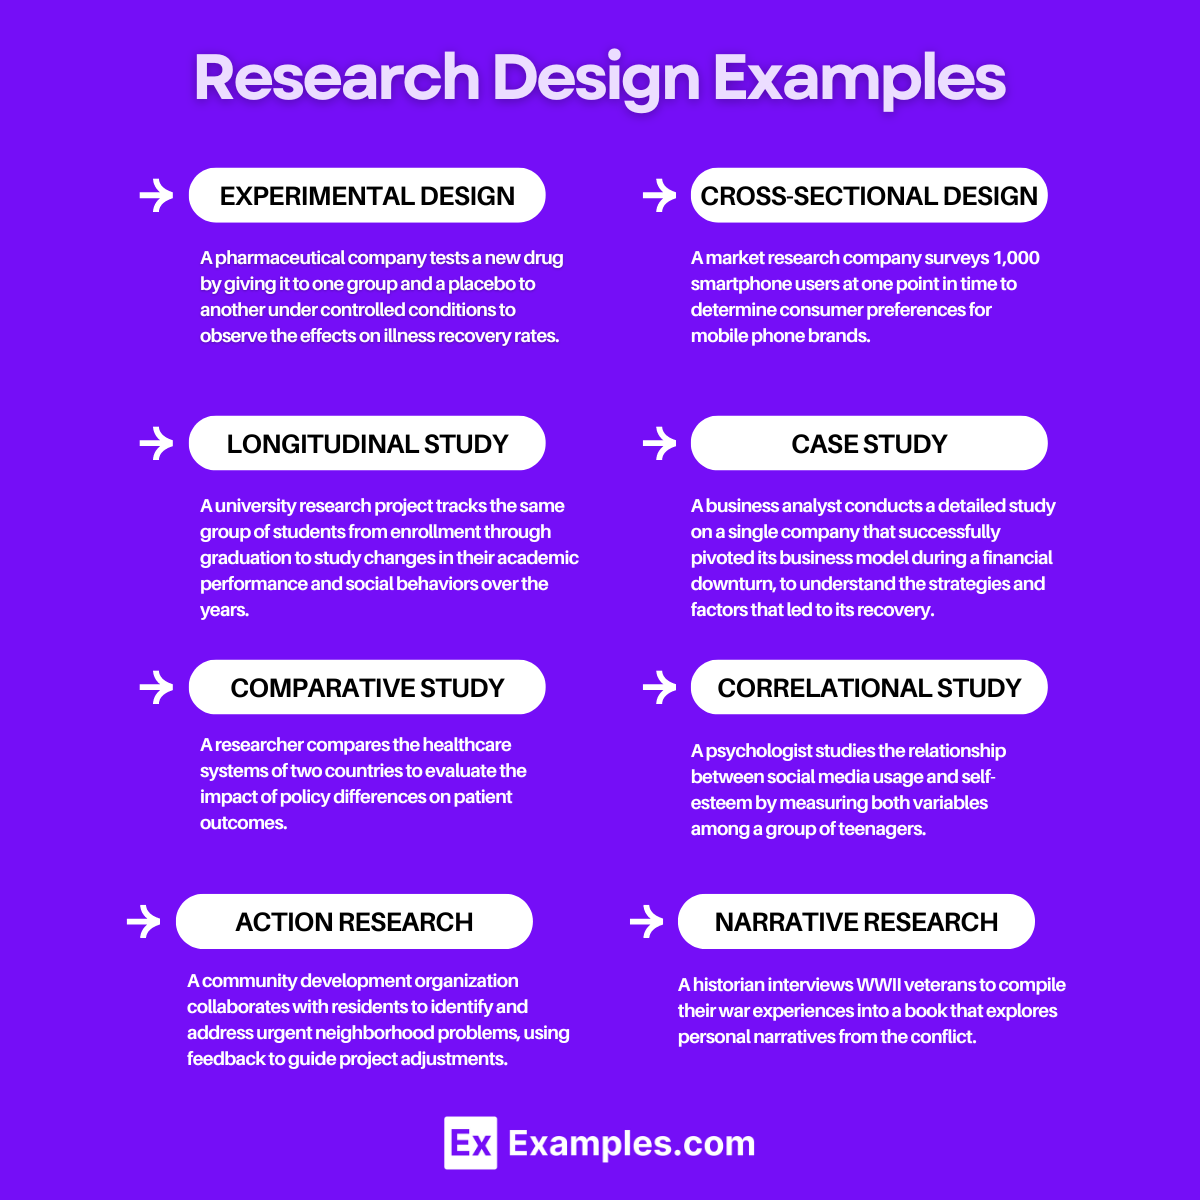 Research Design Examples